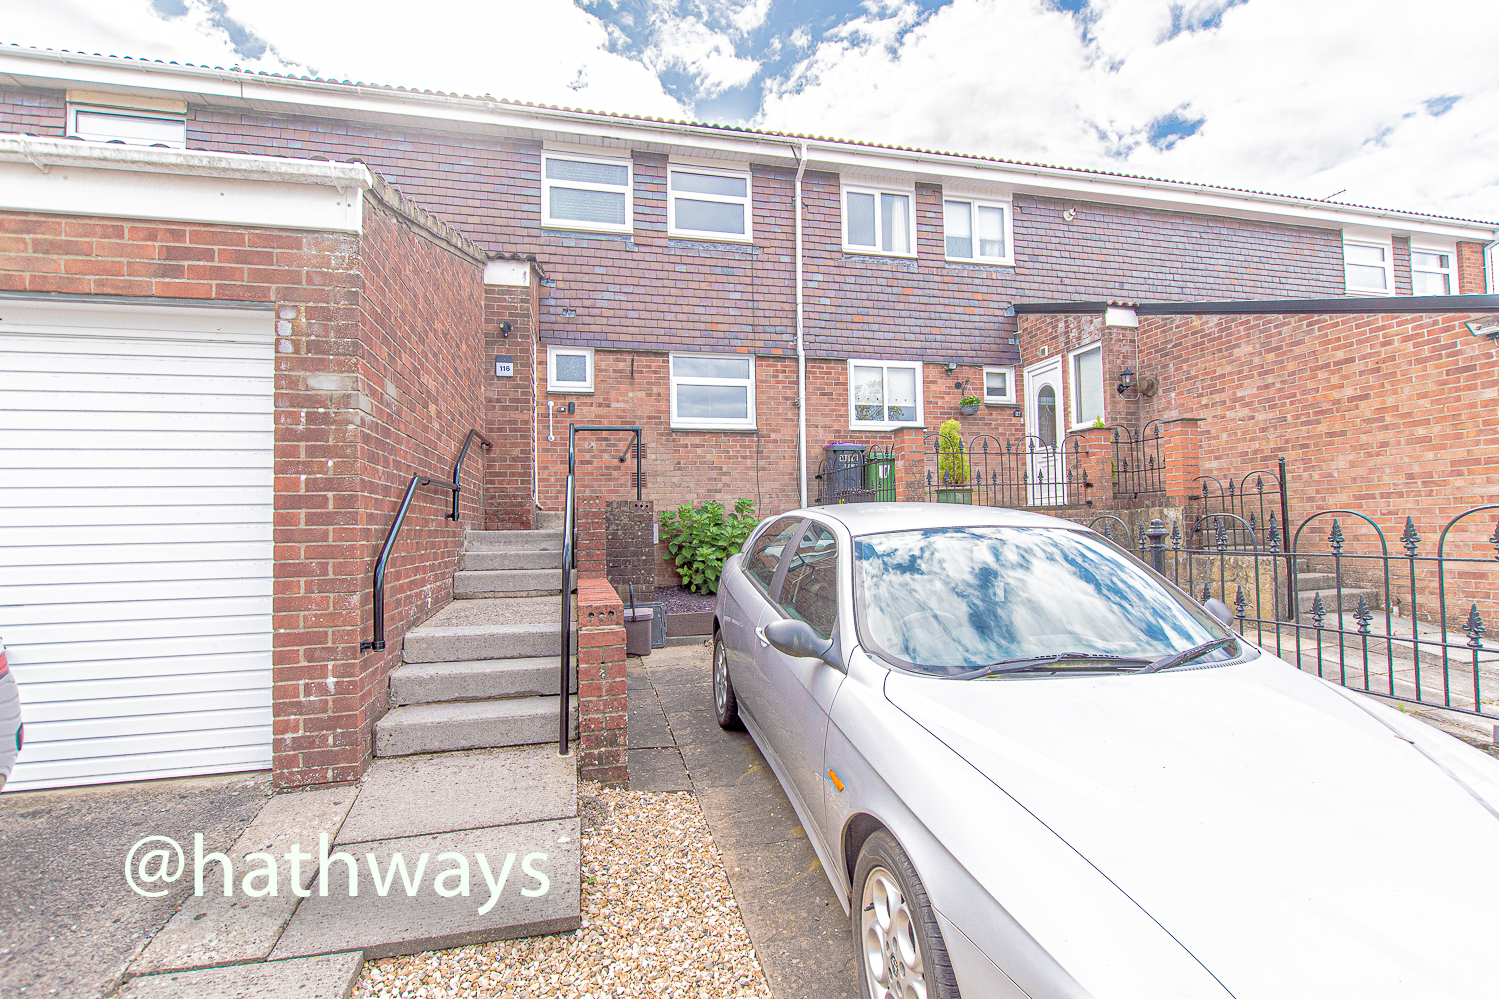 3 bed to rent in Trostrey, Cwmbran  - Property Image 1